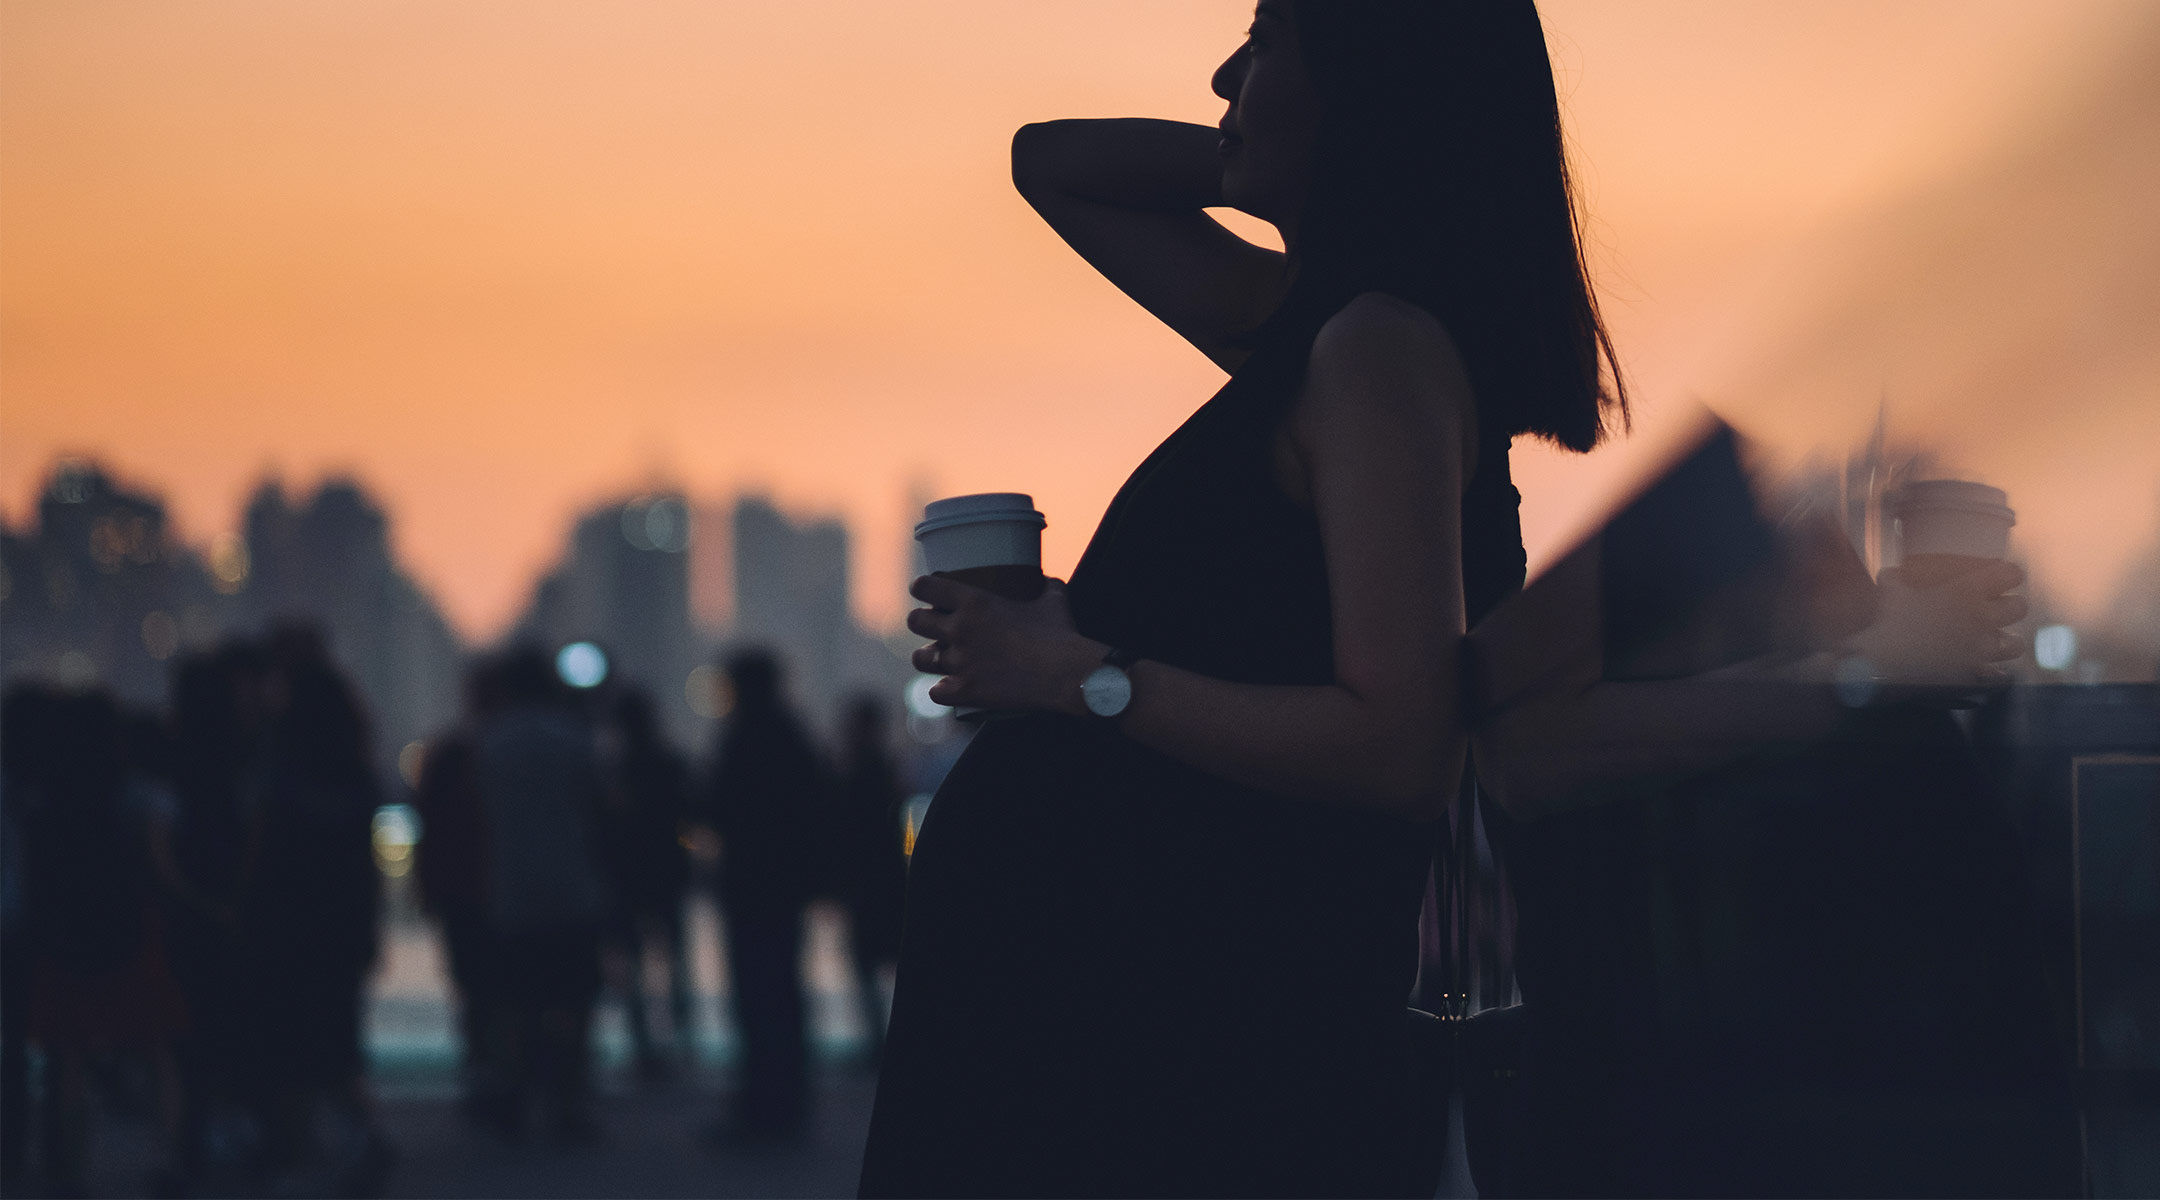 pregnant woman on a city rooftop at dusk